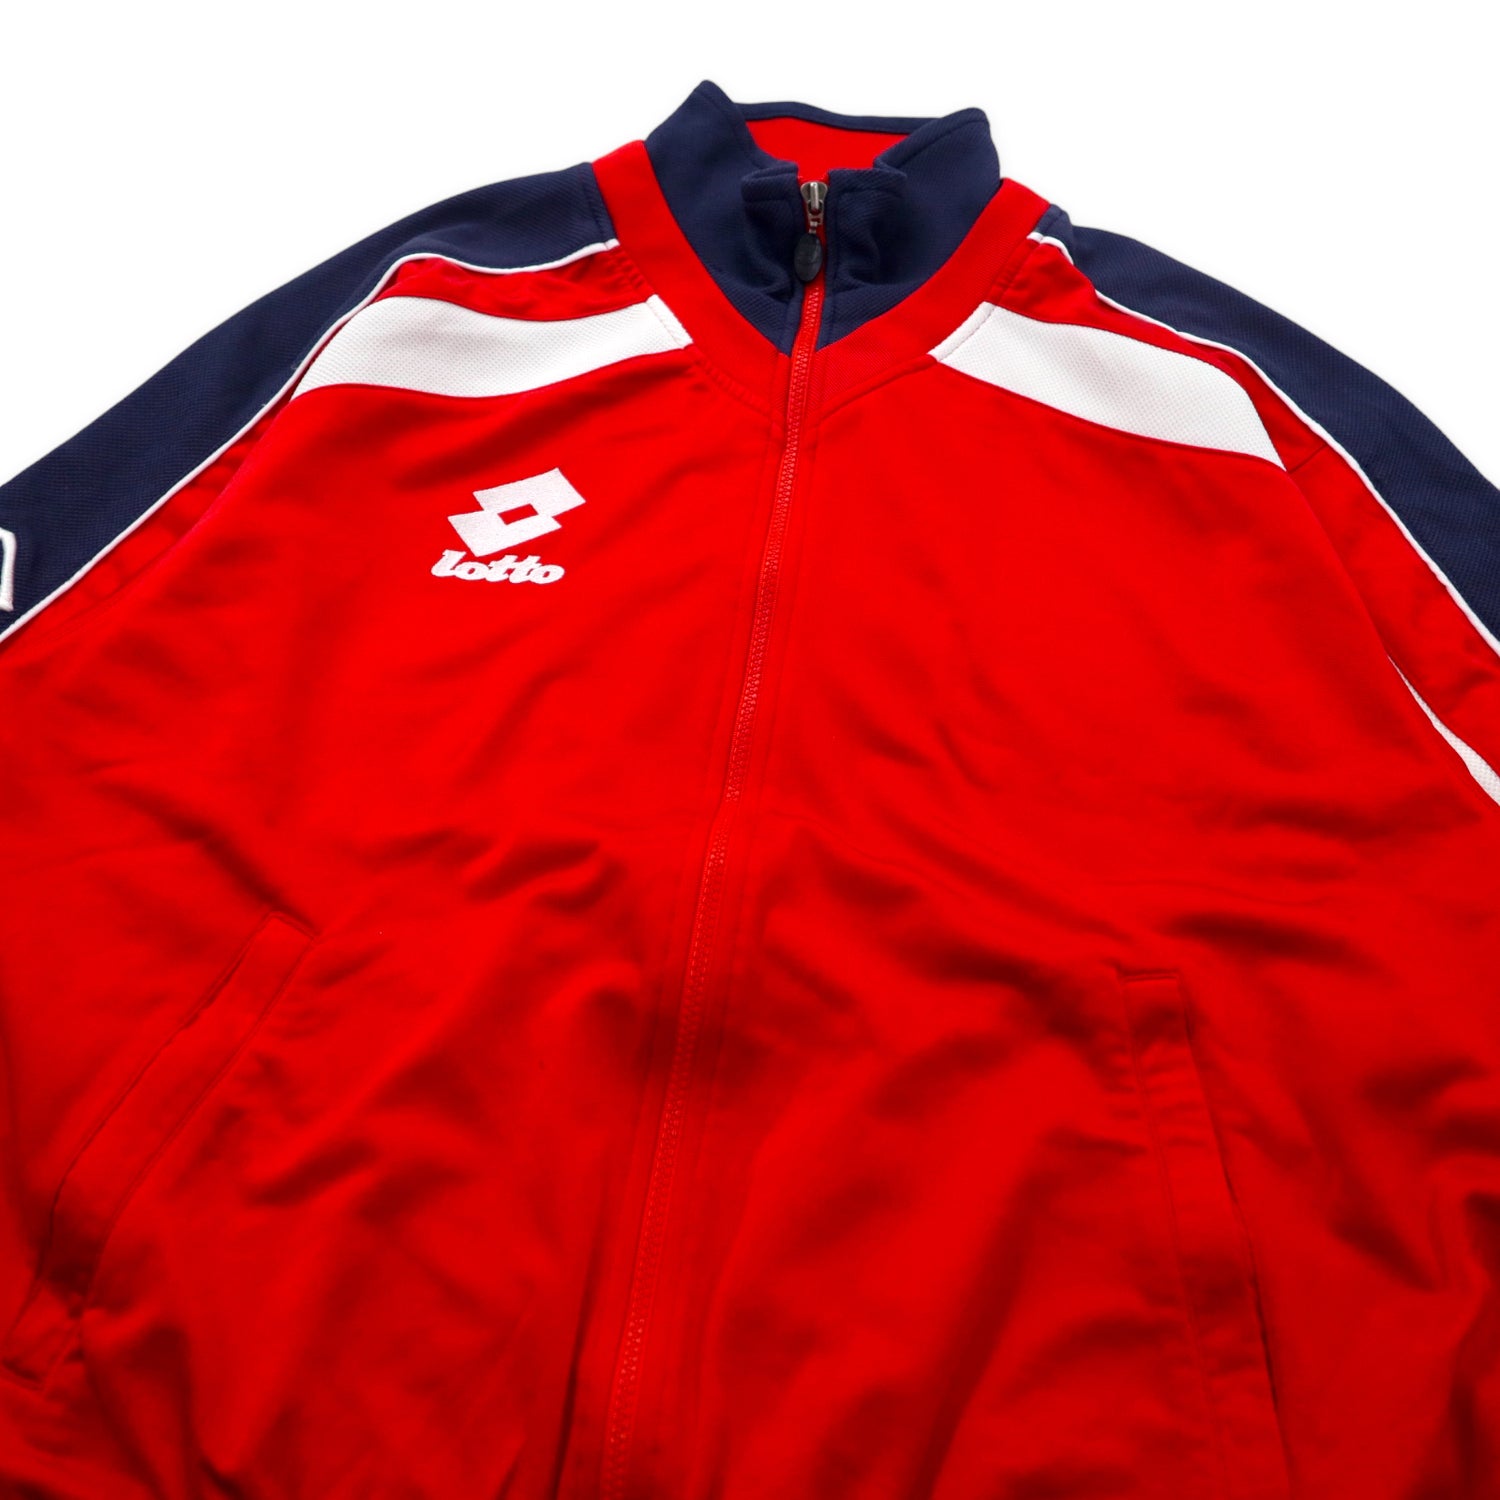 Lotto 90's TRACK JACKET Jersey XL Red polyester logo embroidery 